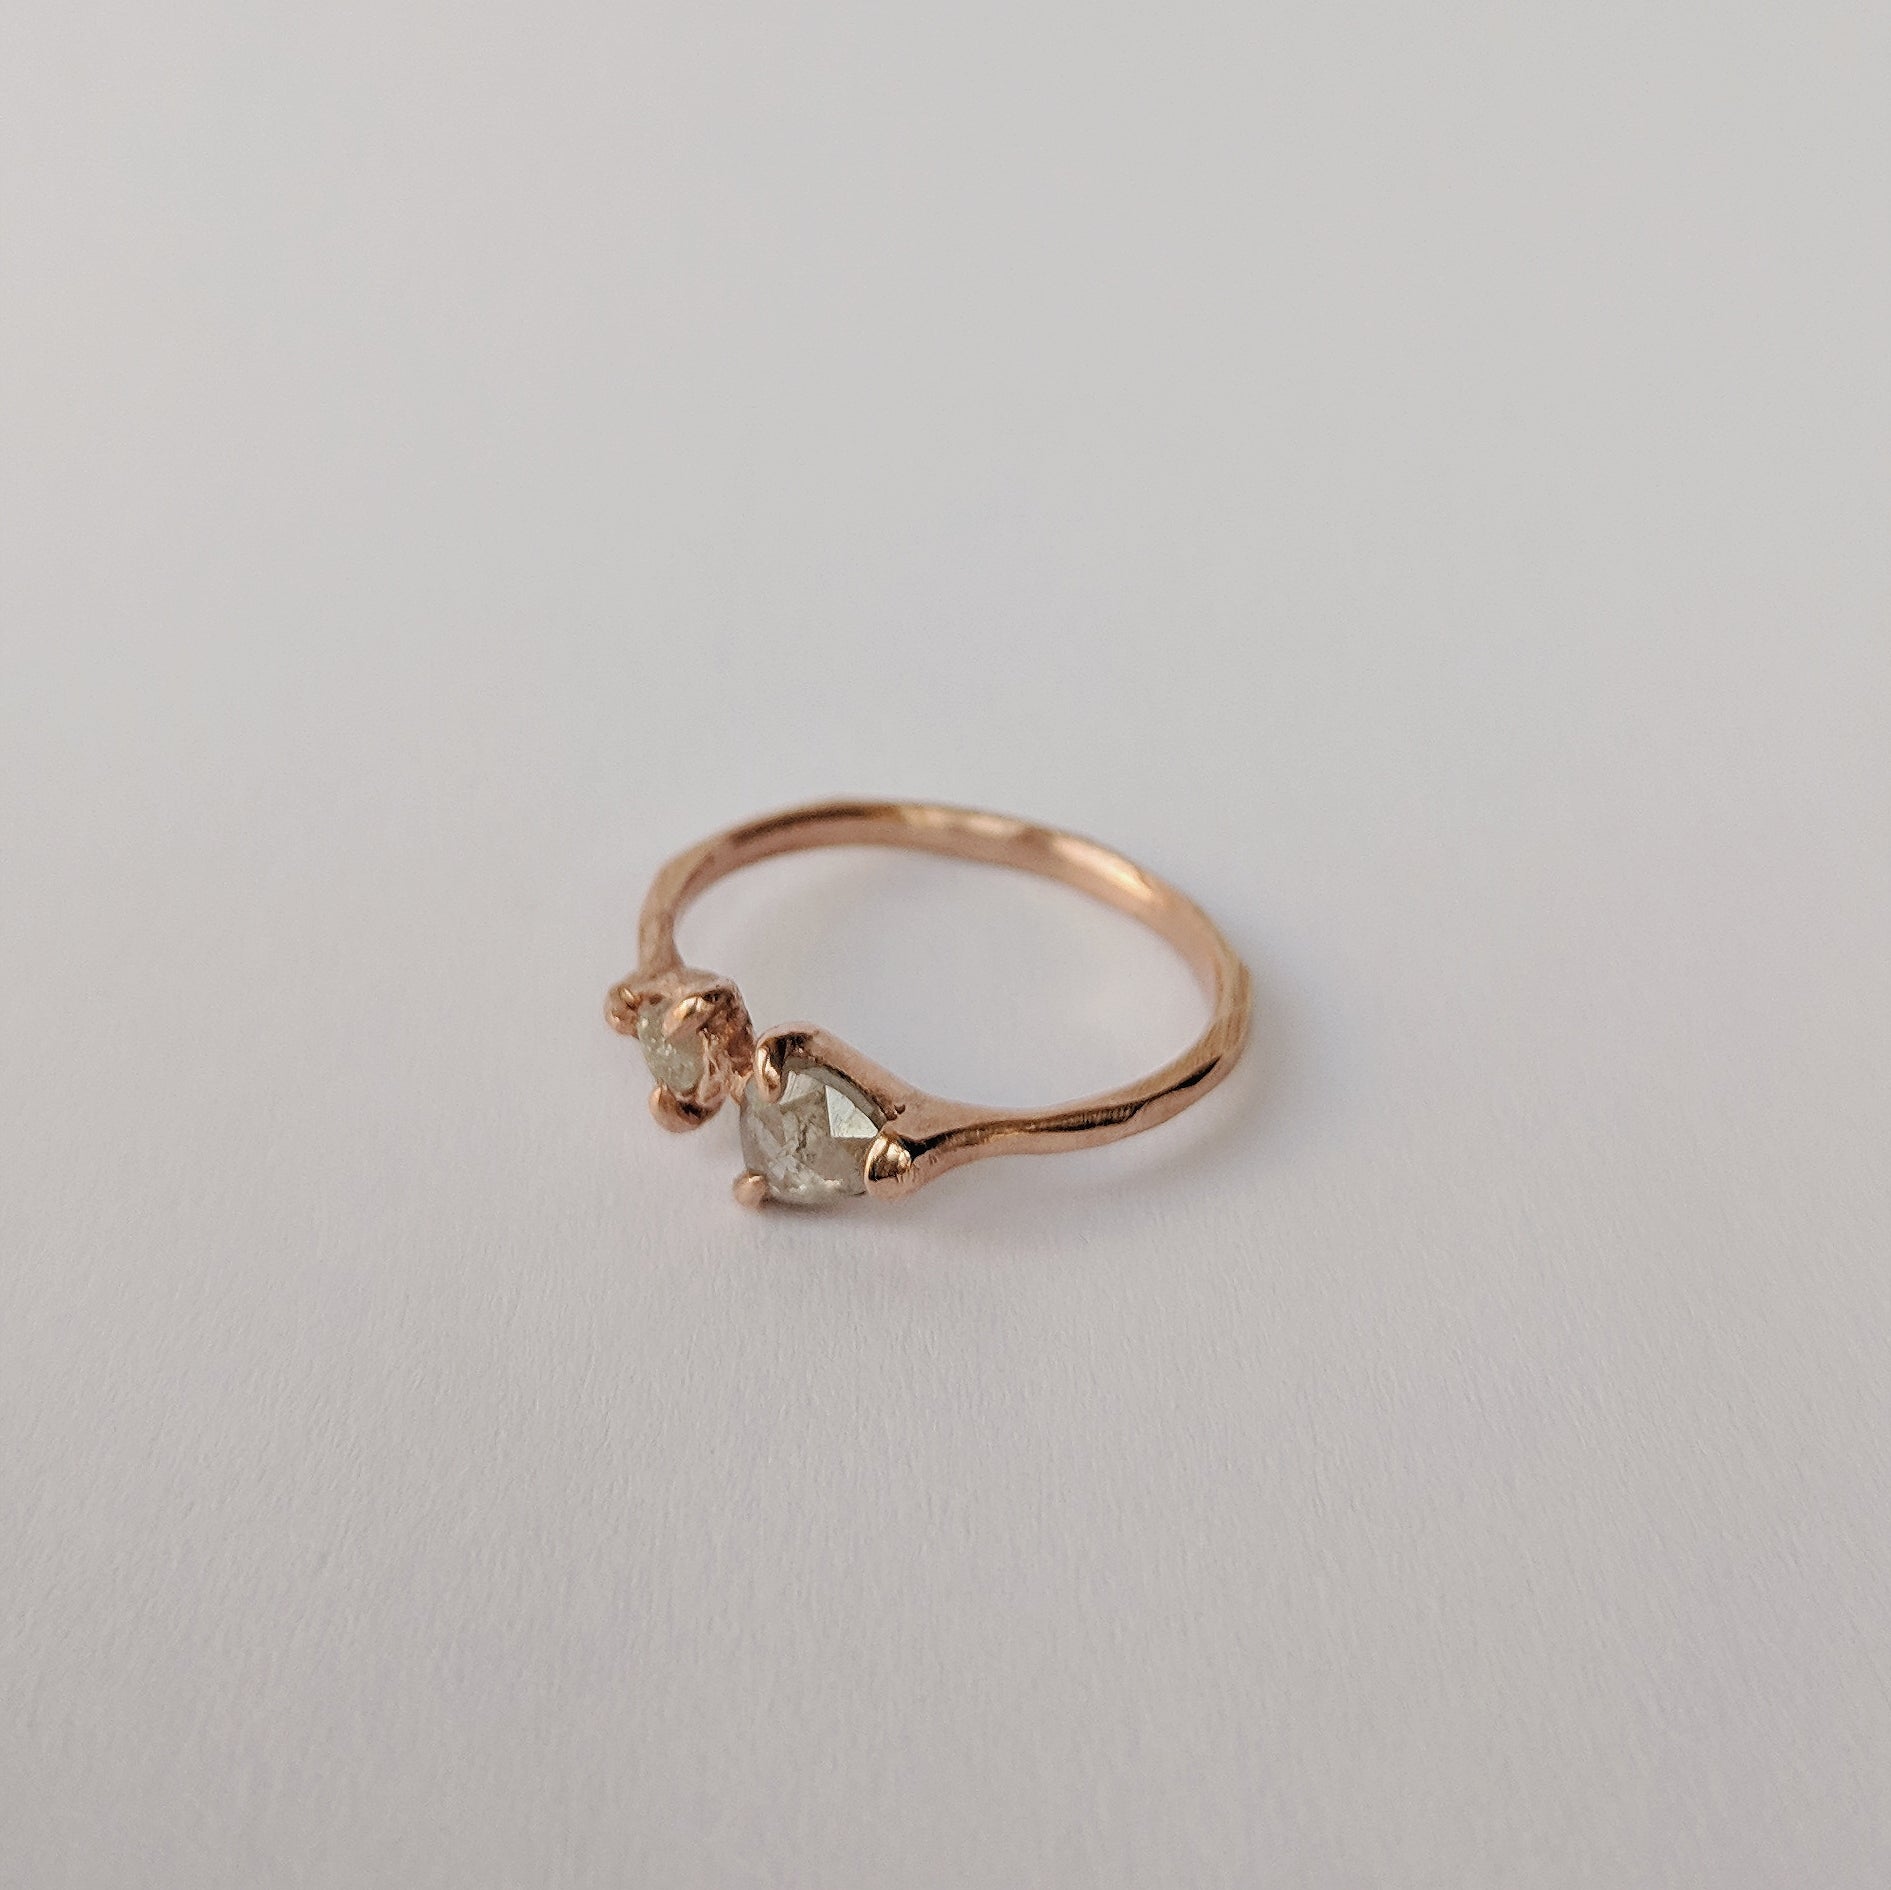 Diamond Ring. Hypoallergenic 585 Rose Gold, Rhodium Detailing. Ring with Diamond Cluster and Two Diamond Spacers